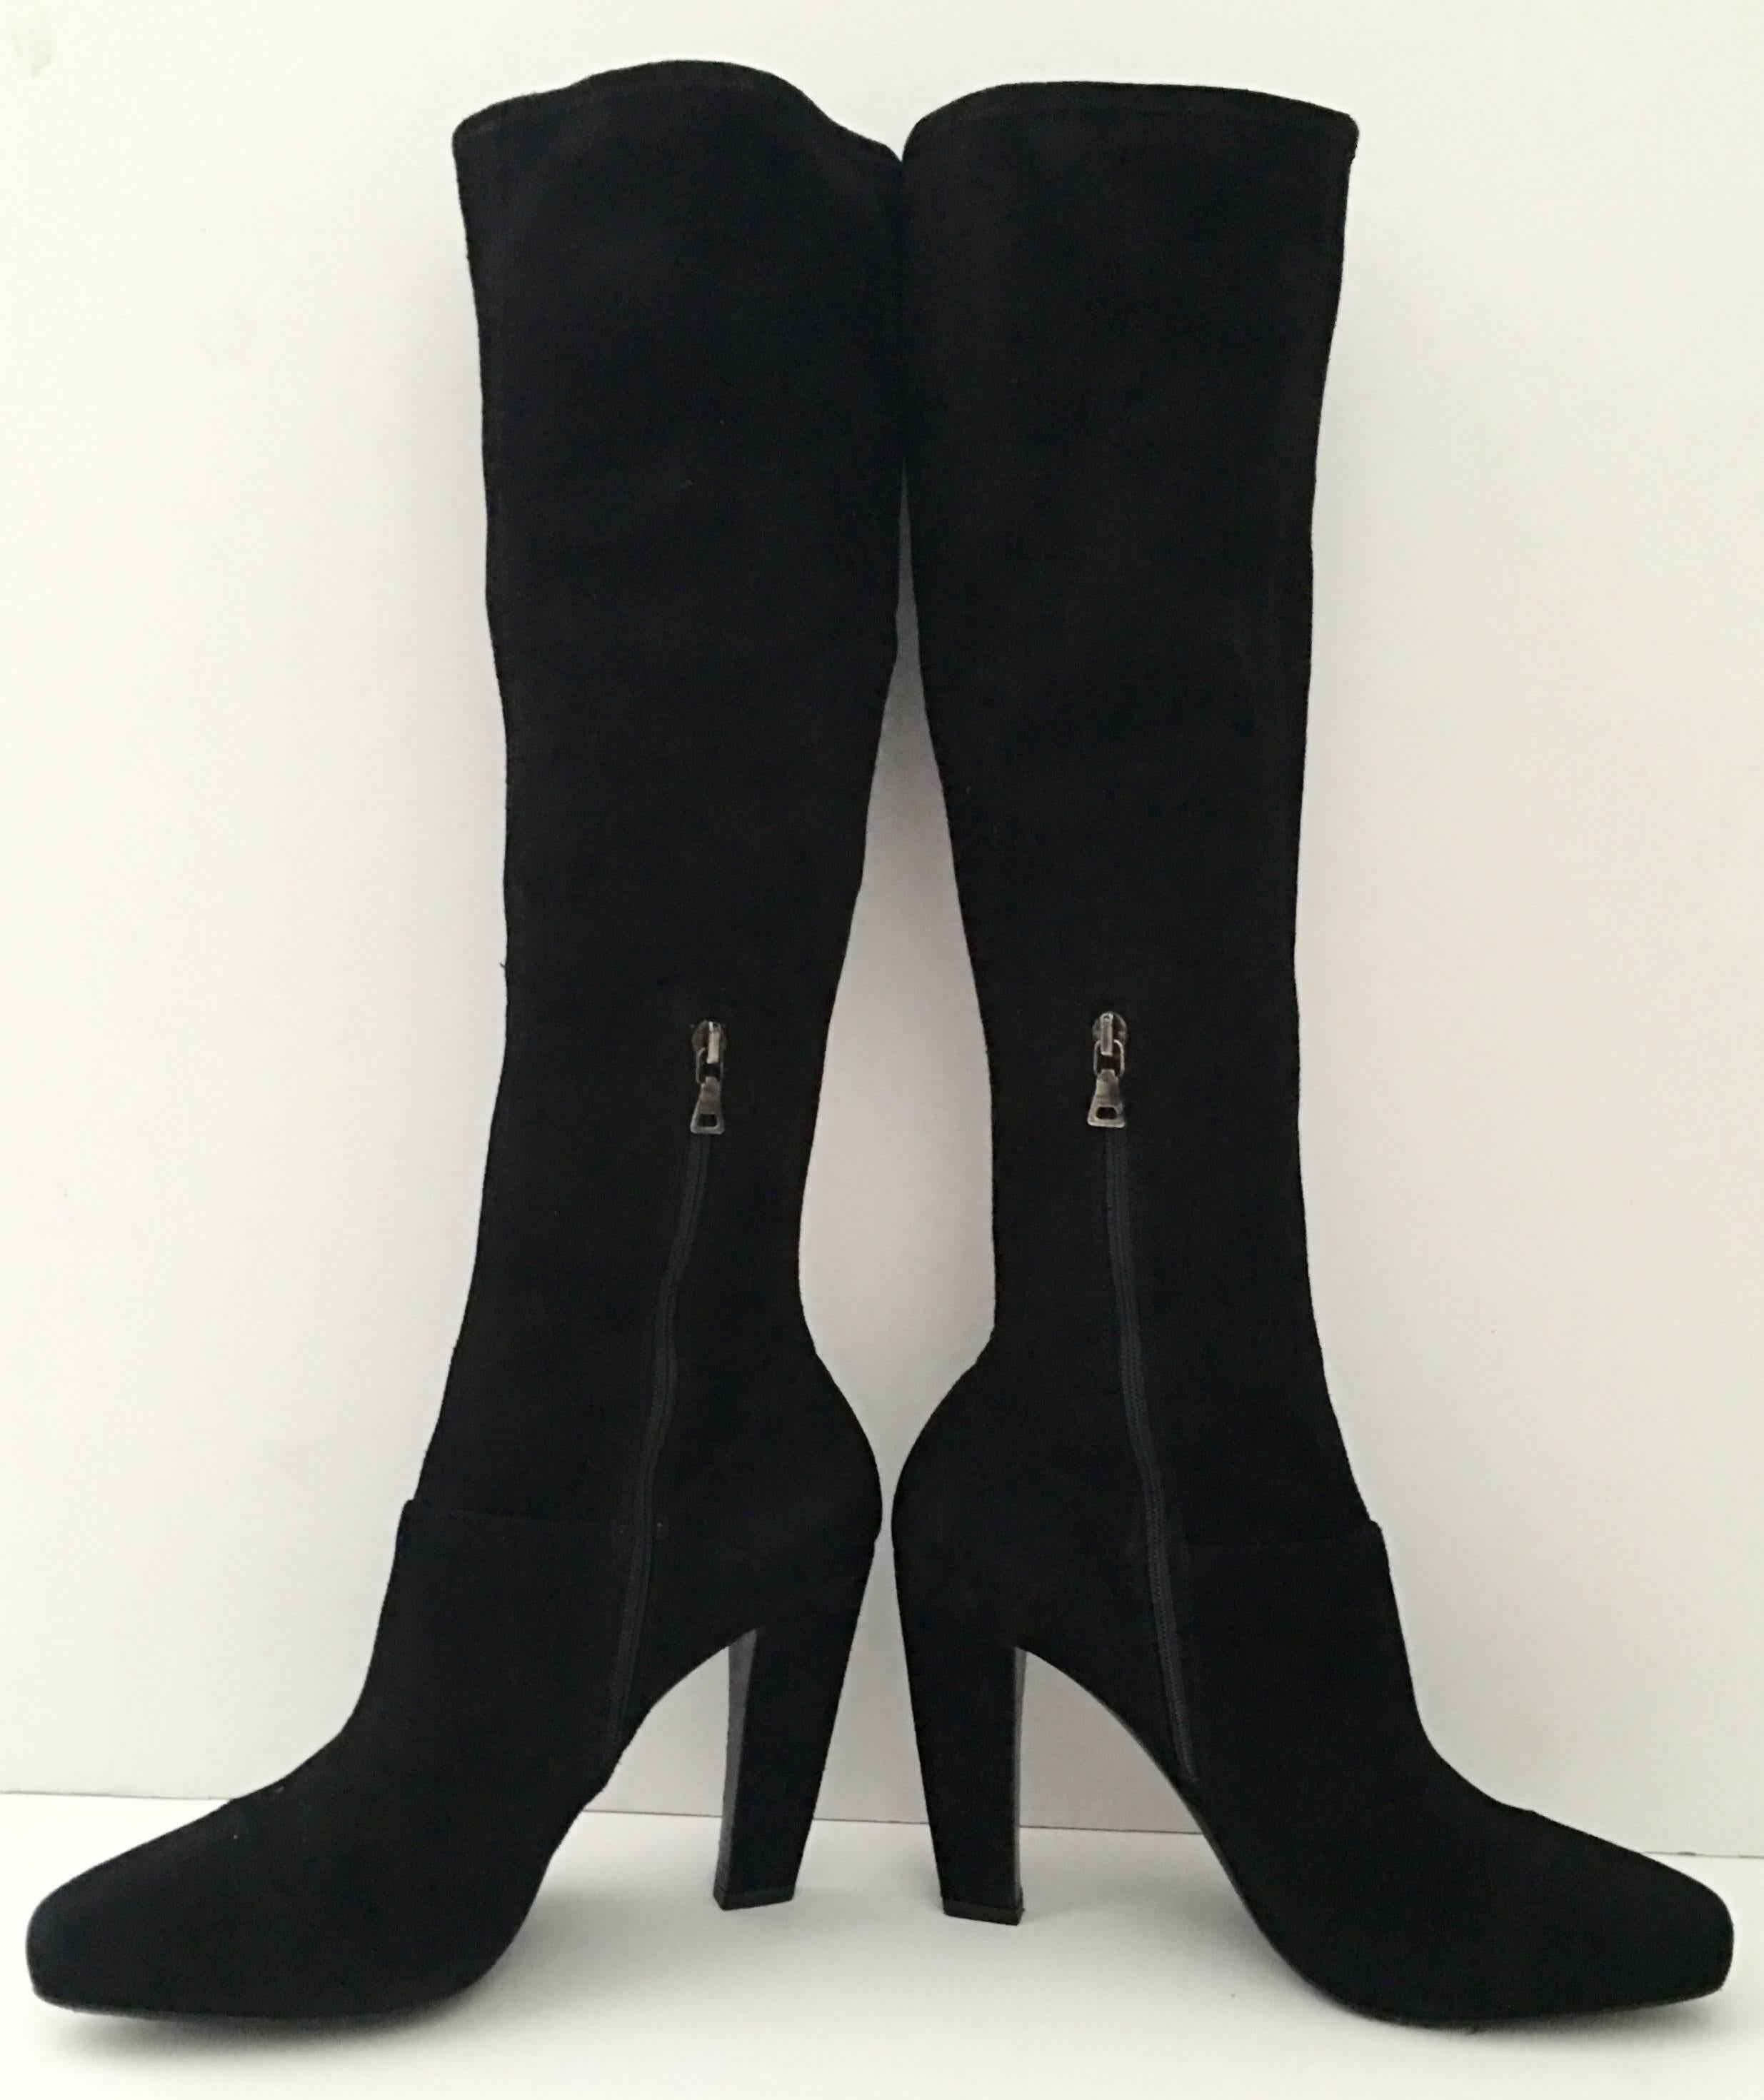 2012 Fall collection Prada black suede square heel boots. Prada quality soft, supple, with a bit of stretch falling just at the bottom of the knee. Soft pointy toe with a curved square high heel, these boots are a great neutral for any occasion.